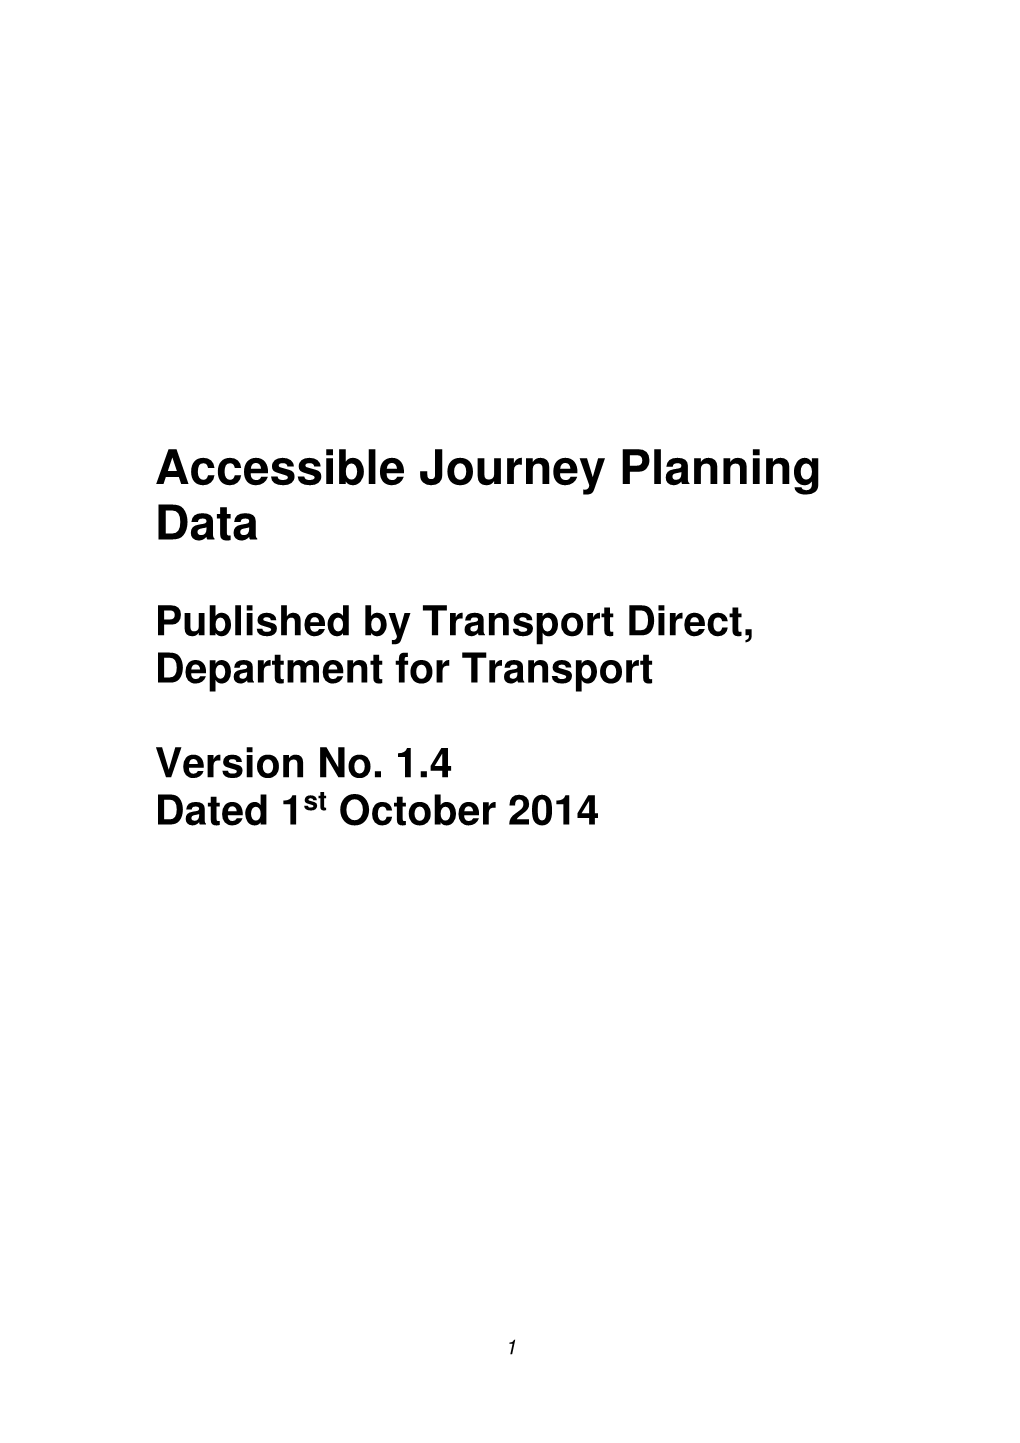 Accessible Journey Planning Data